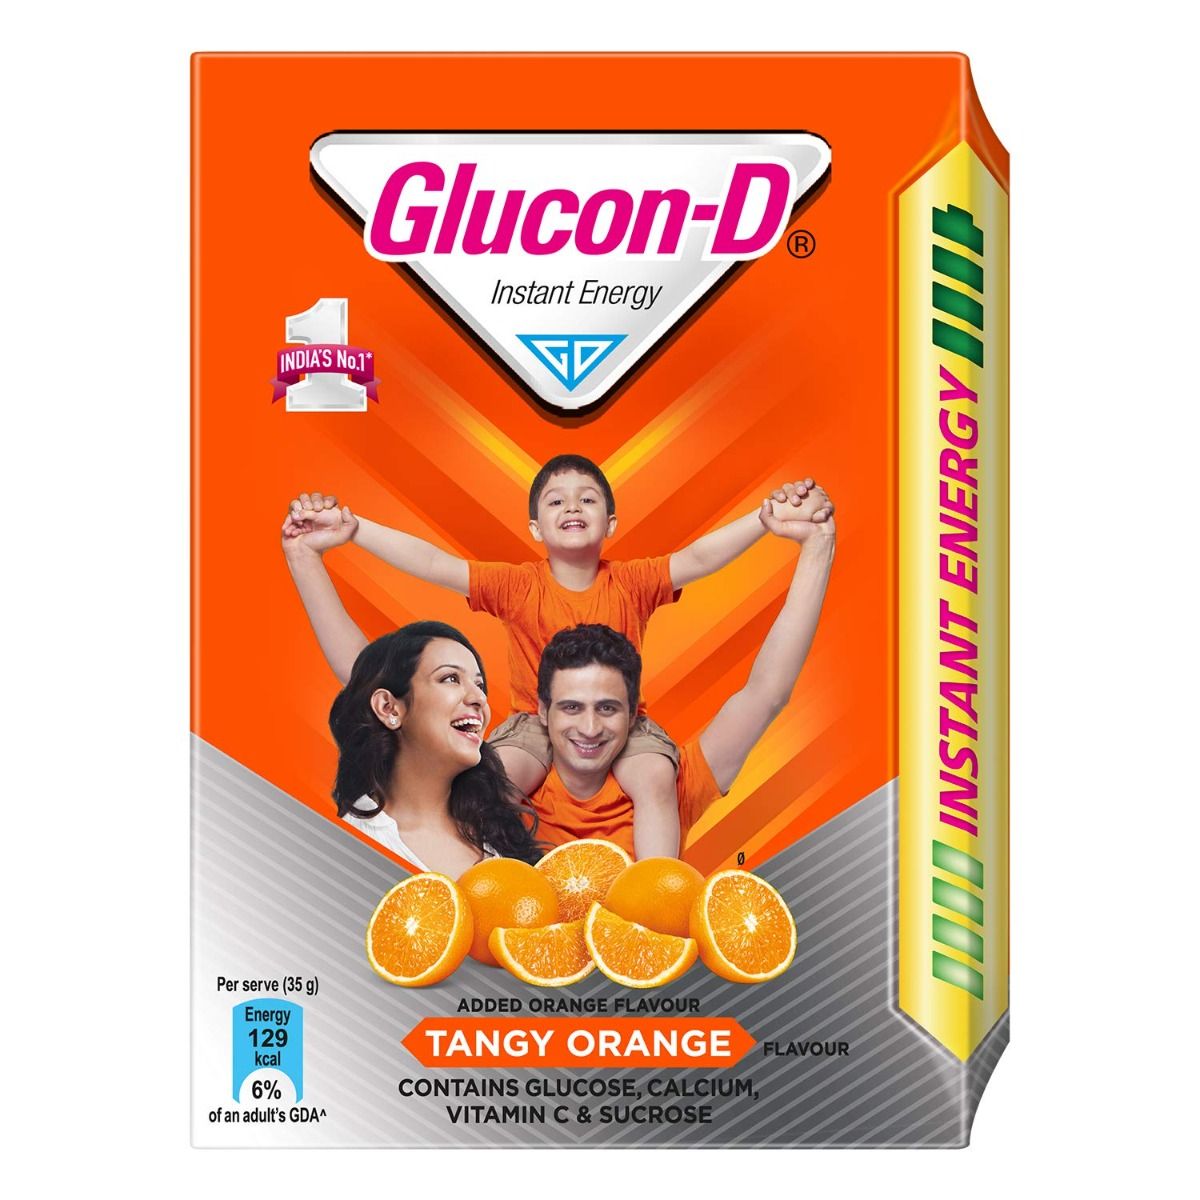 Glucon-D Instant Energy Drink Tangy Orange Flavour Powder, 1 kg Refill Pack, Pack of 1 